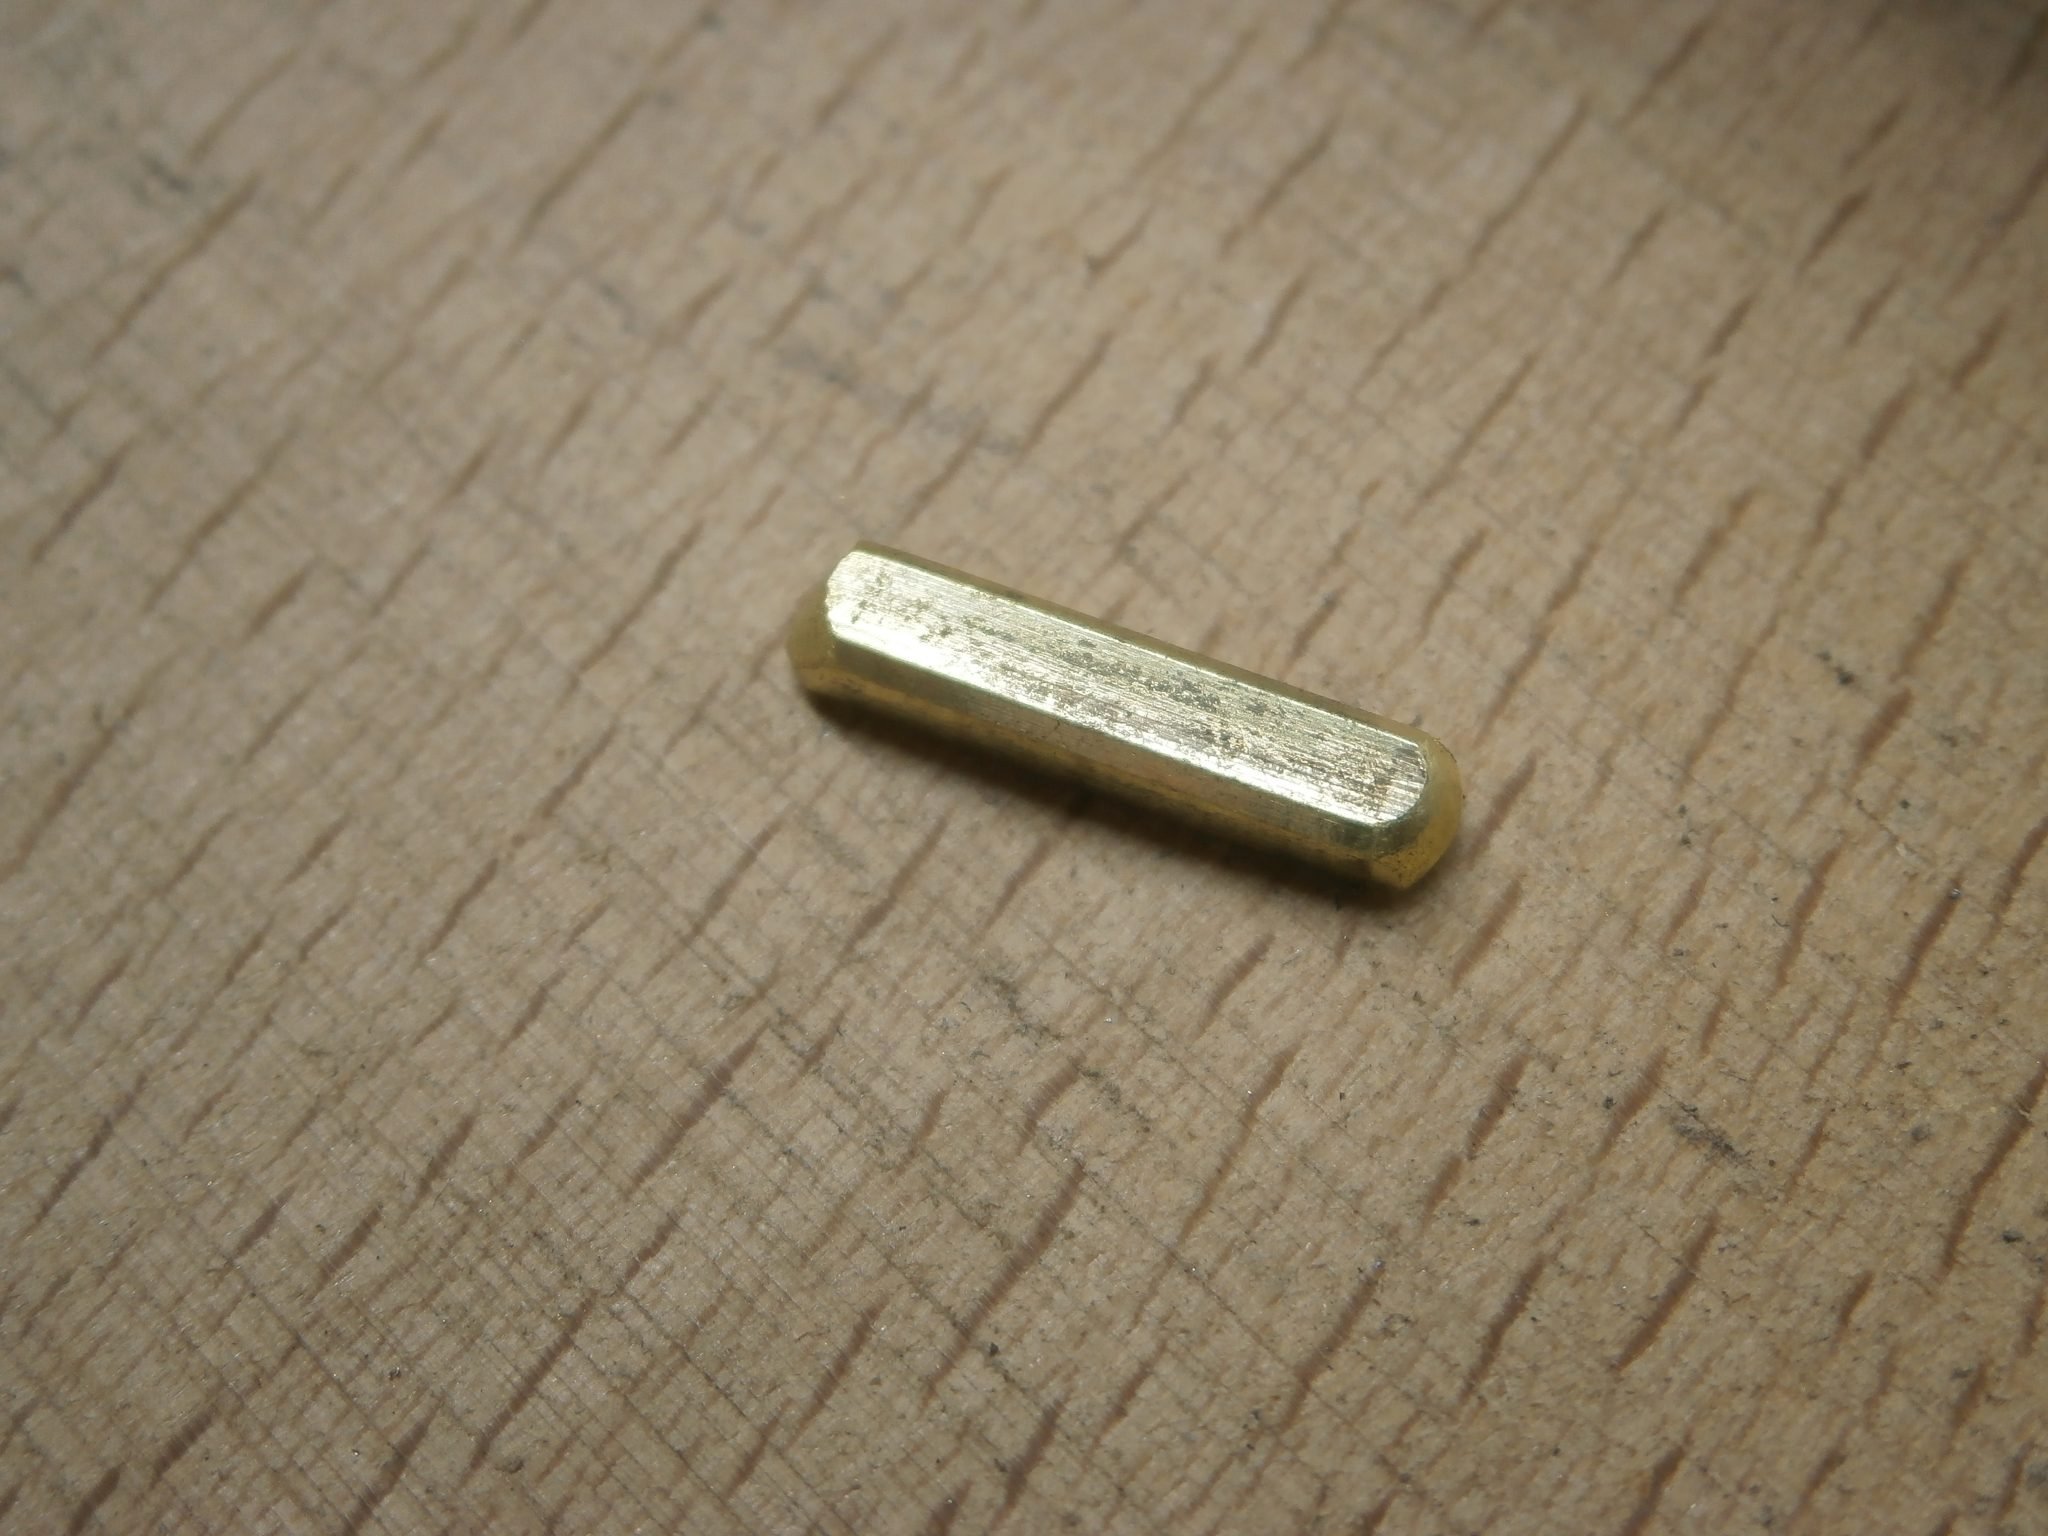 Solid 18ct gold bar after the original ring material is melted down